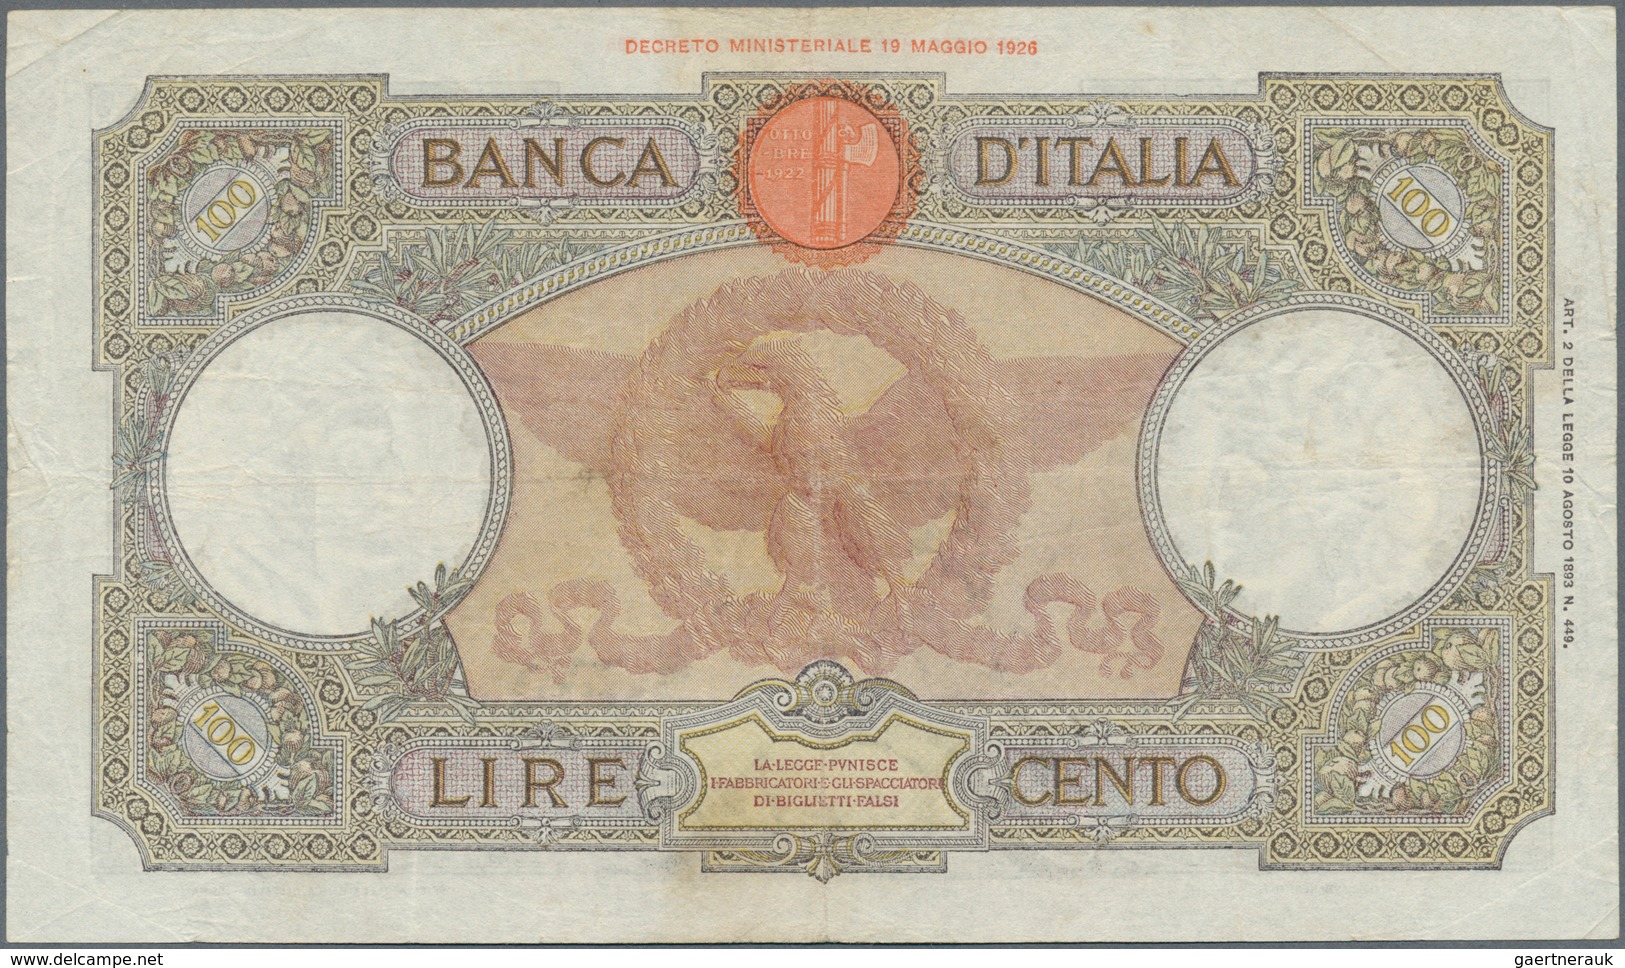 Italy / Italien: set of 8 notes 100 Lire 1937/39/40/42 P. 55, all used with folds, border tears poss